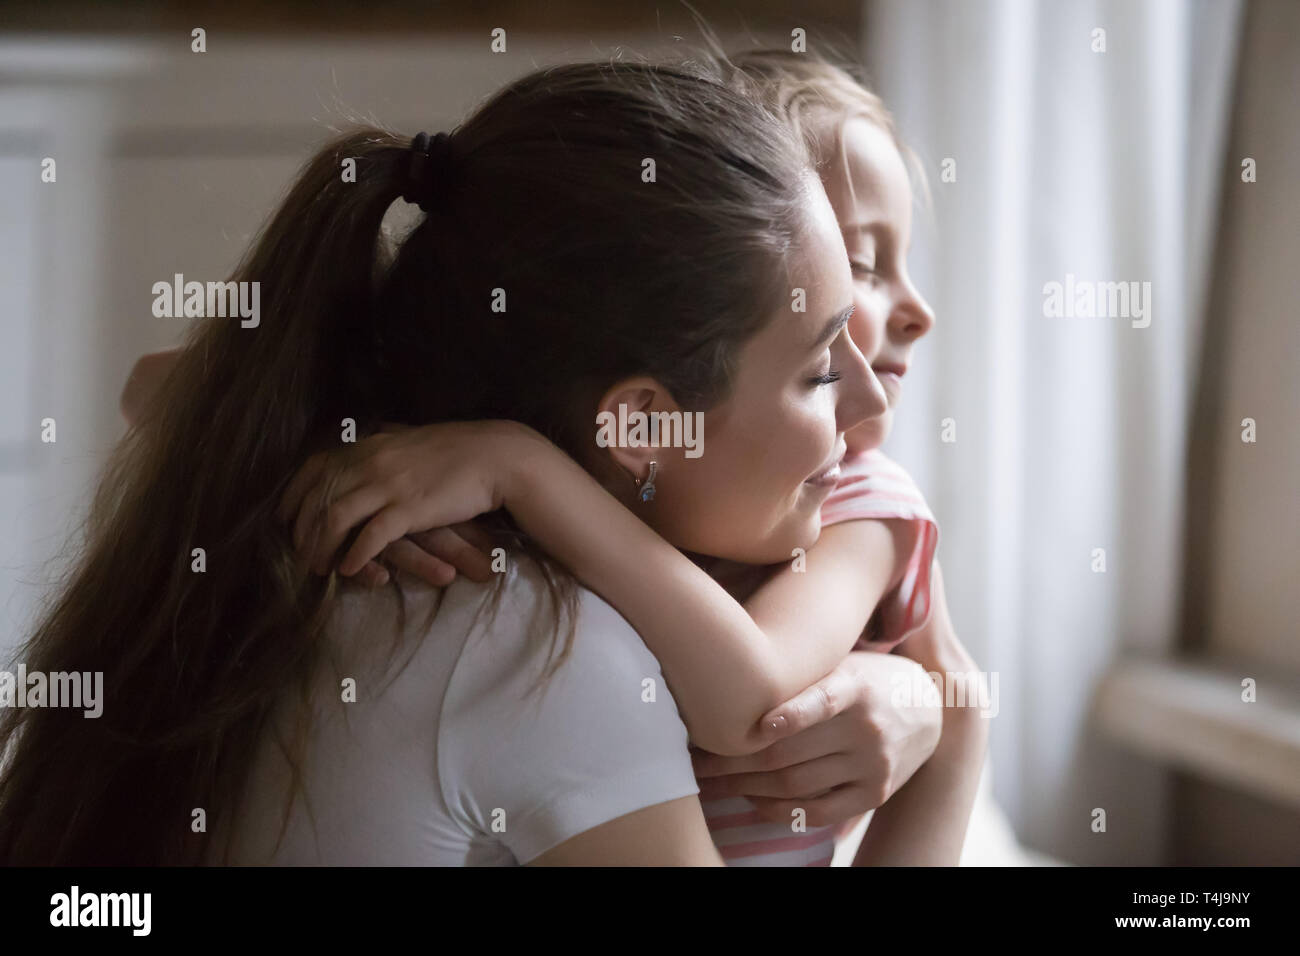 Loving mother give strong hug to daughter with eyes closed Stock Photo